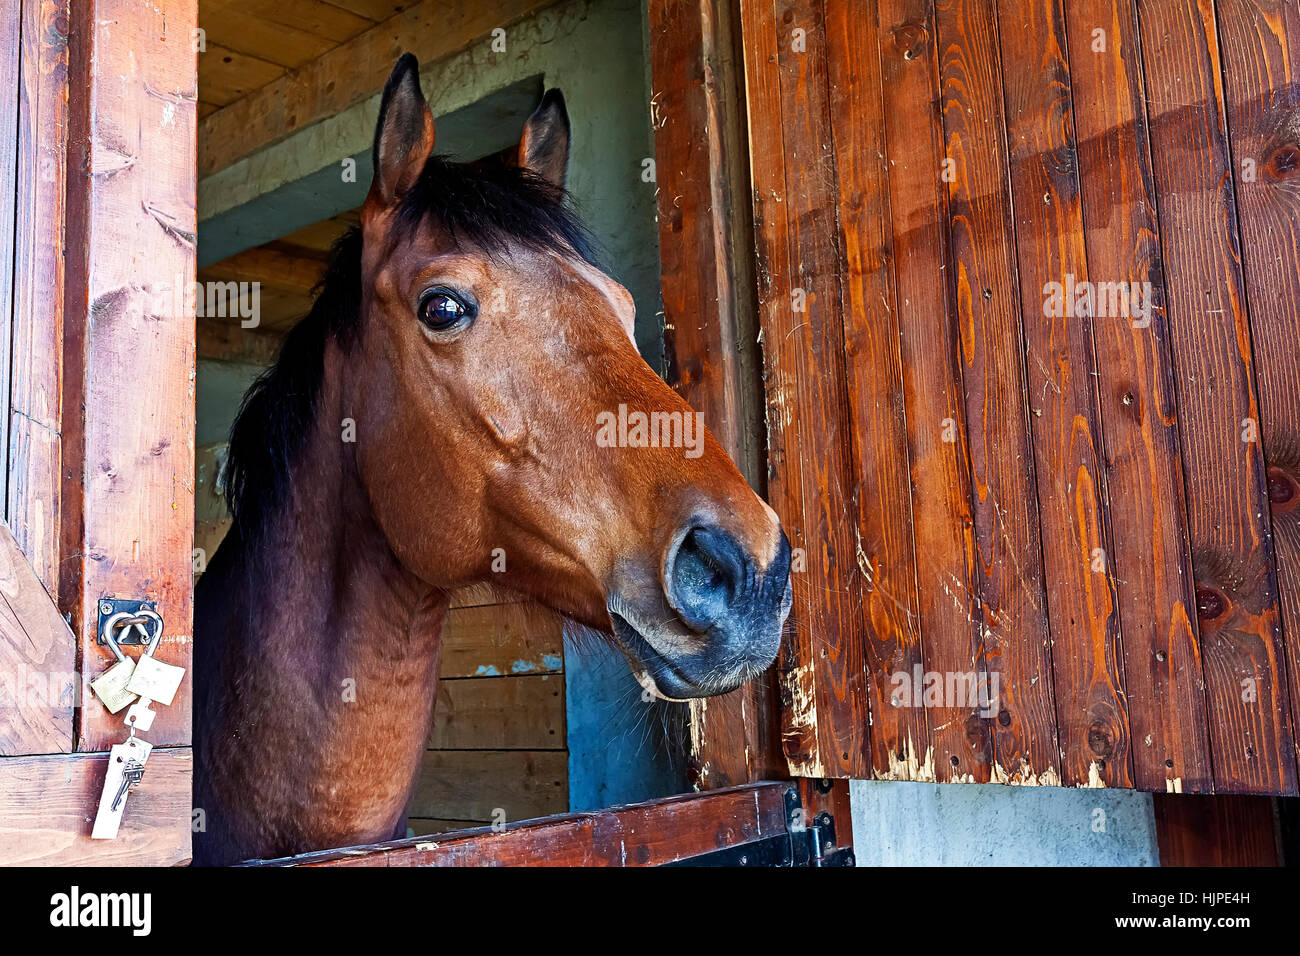 English thoroughbred racehorse in box Stock Photo